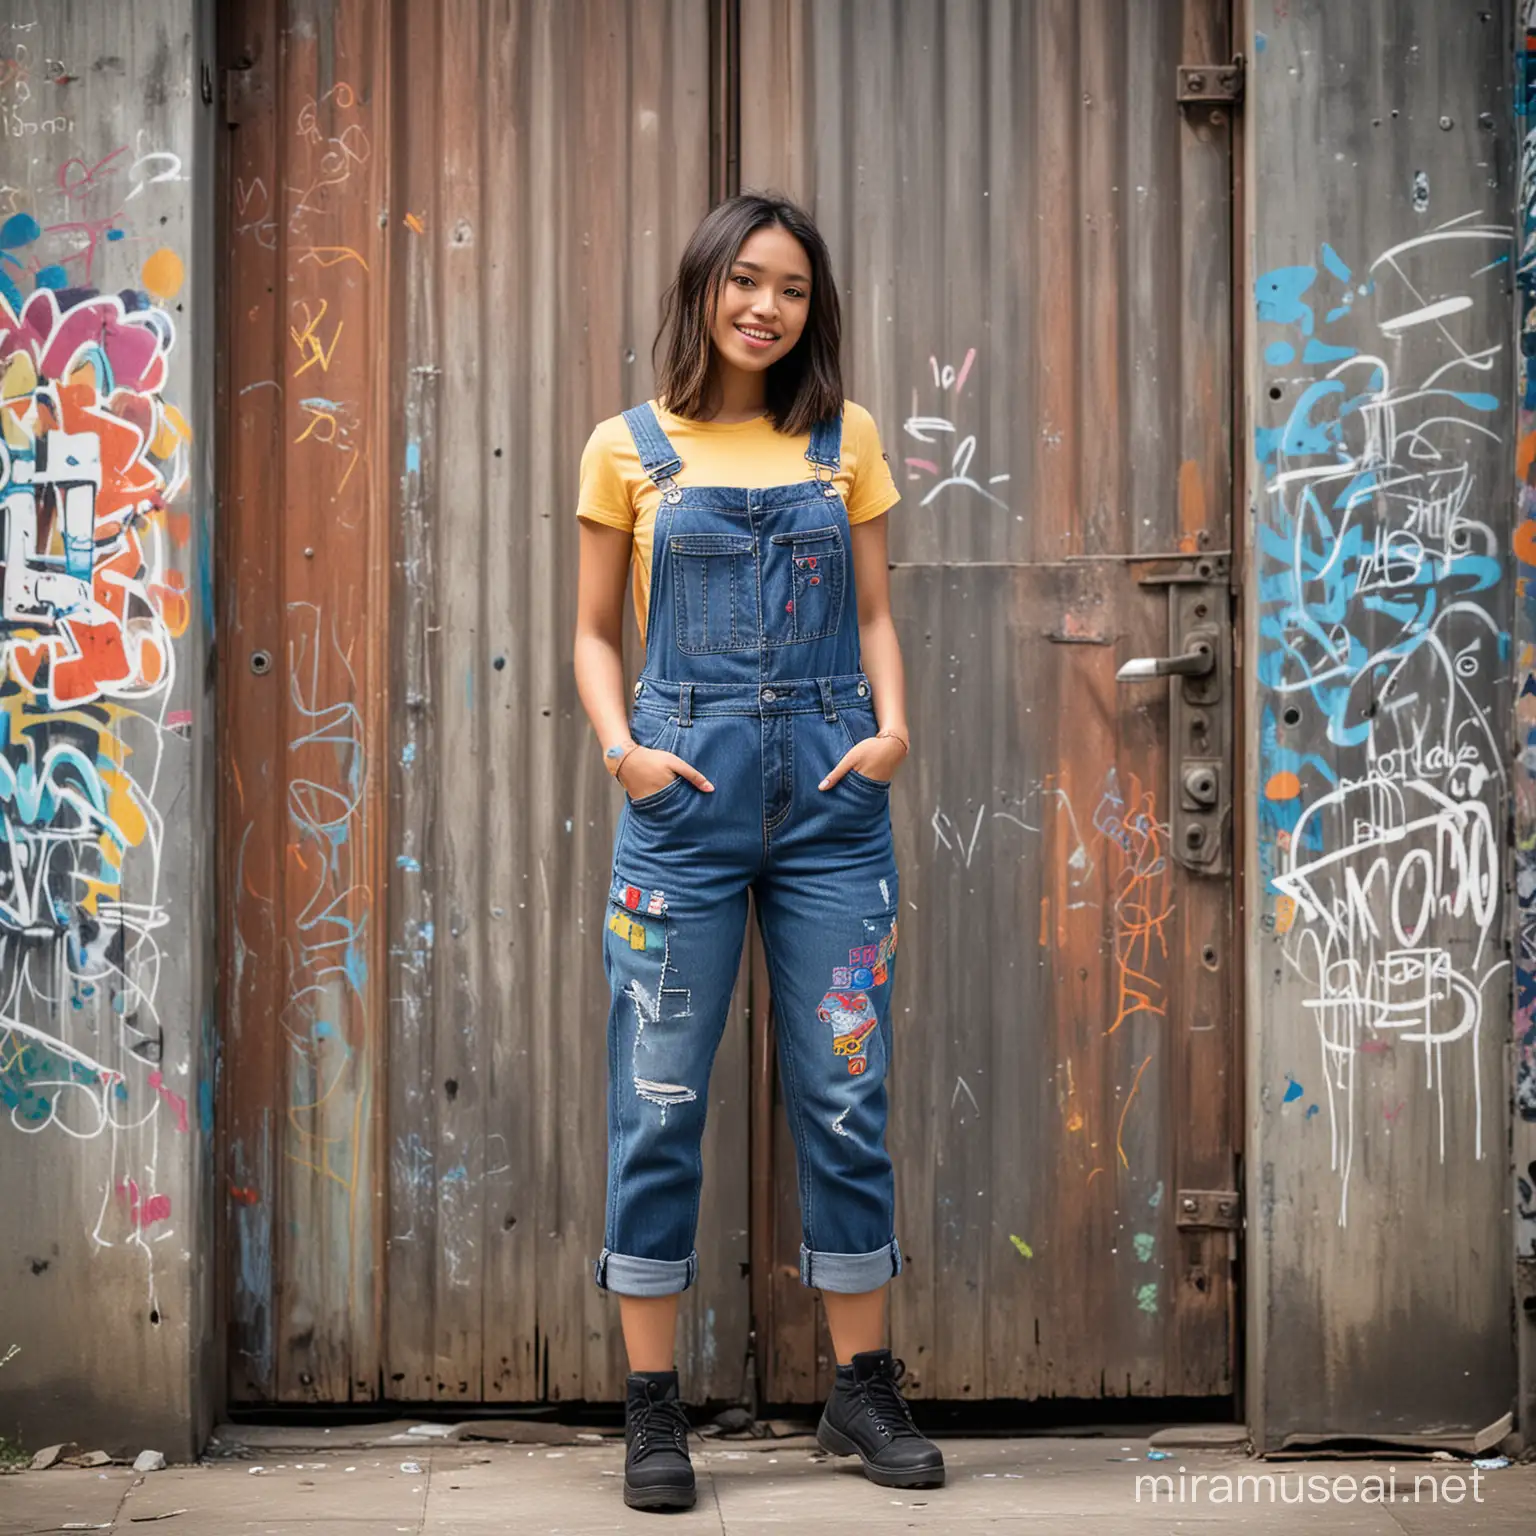 Contemporary Indonesian Teenager Poses by GraffitiCovered Steel Door